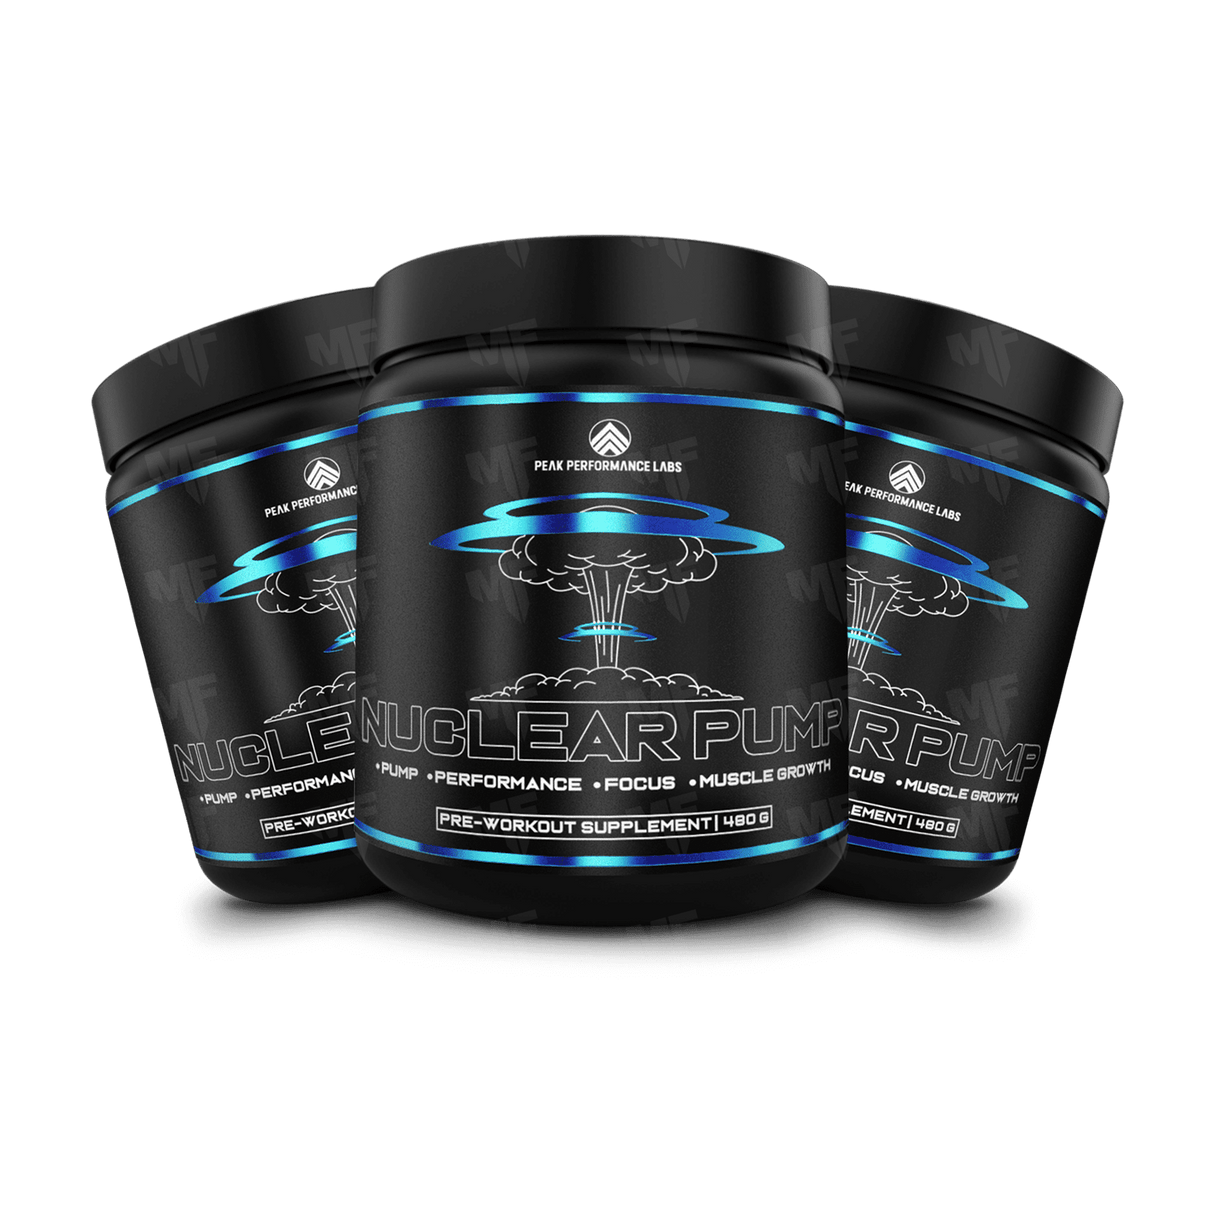 Nuclear Pump by Peak Performance Labs - Muscle Factory, LLC